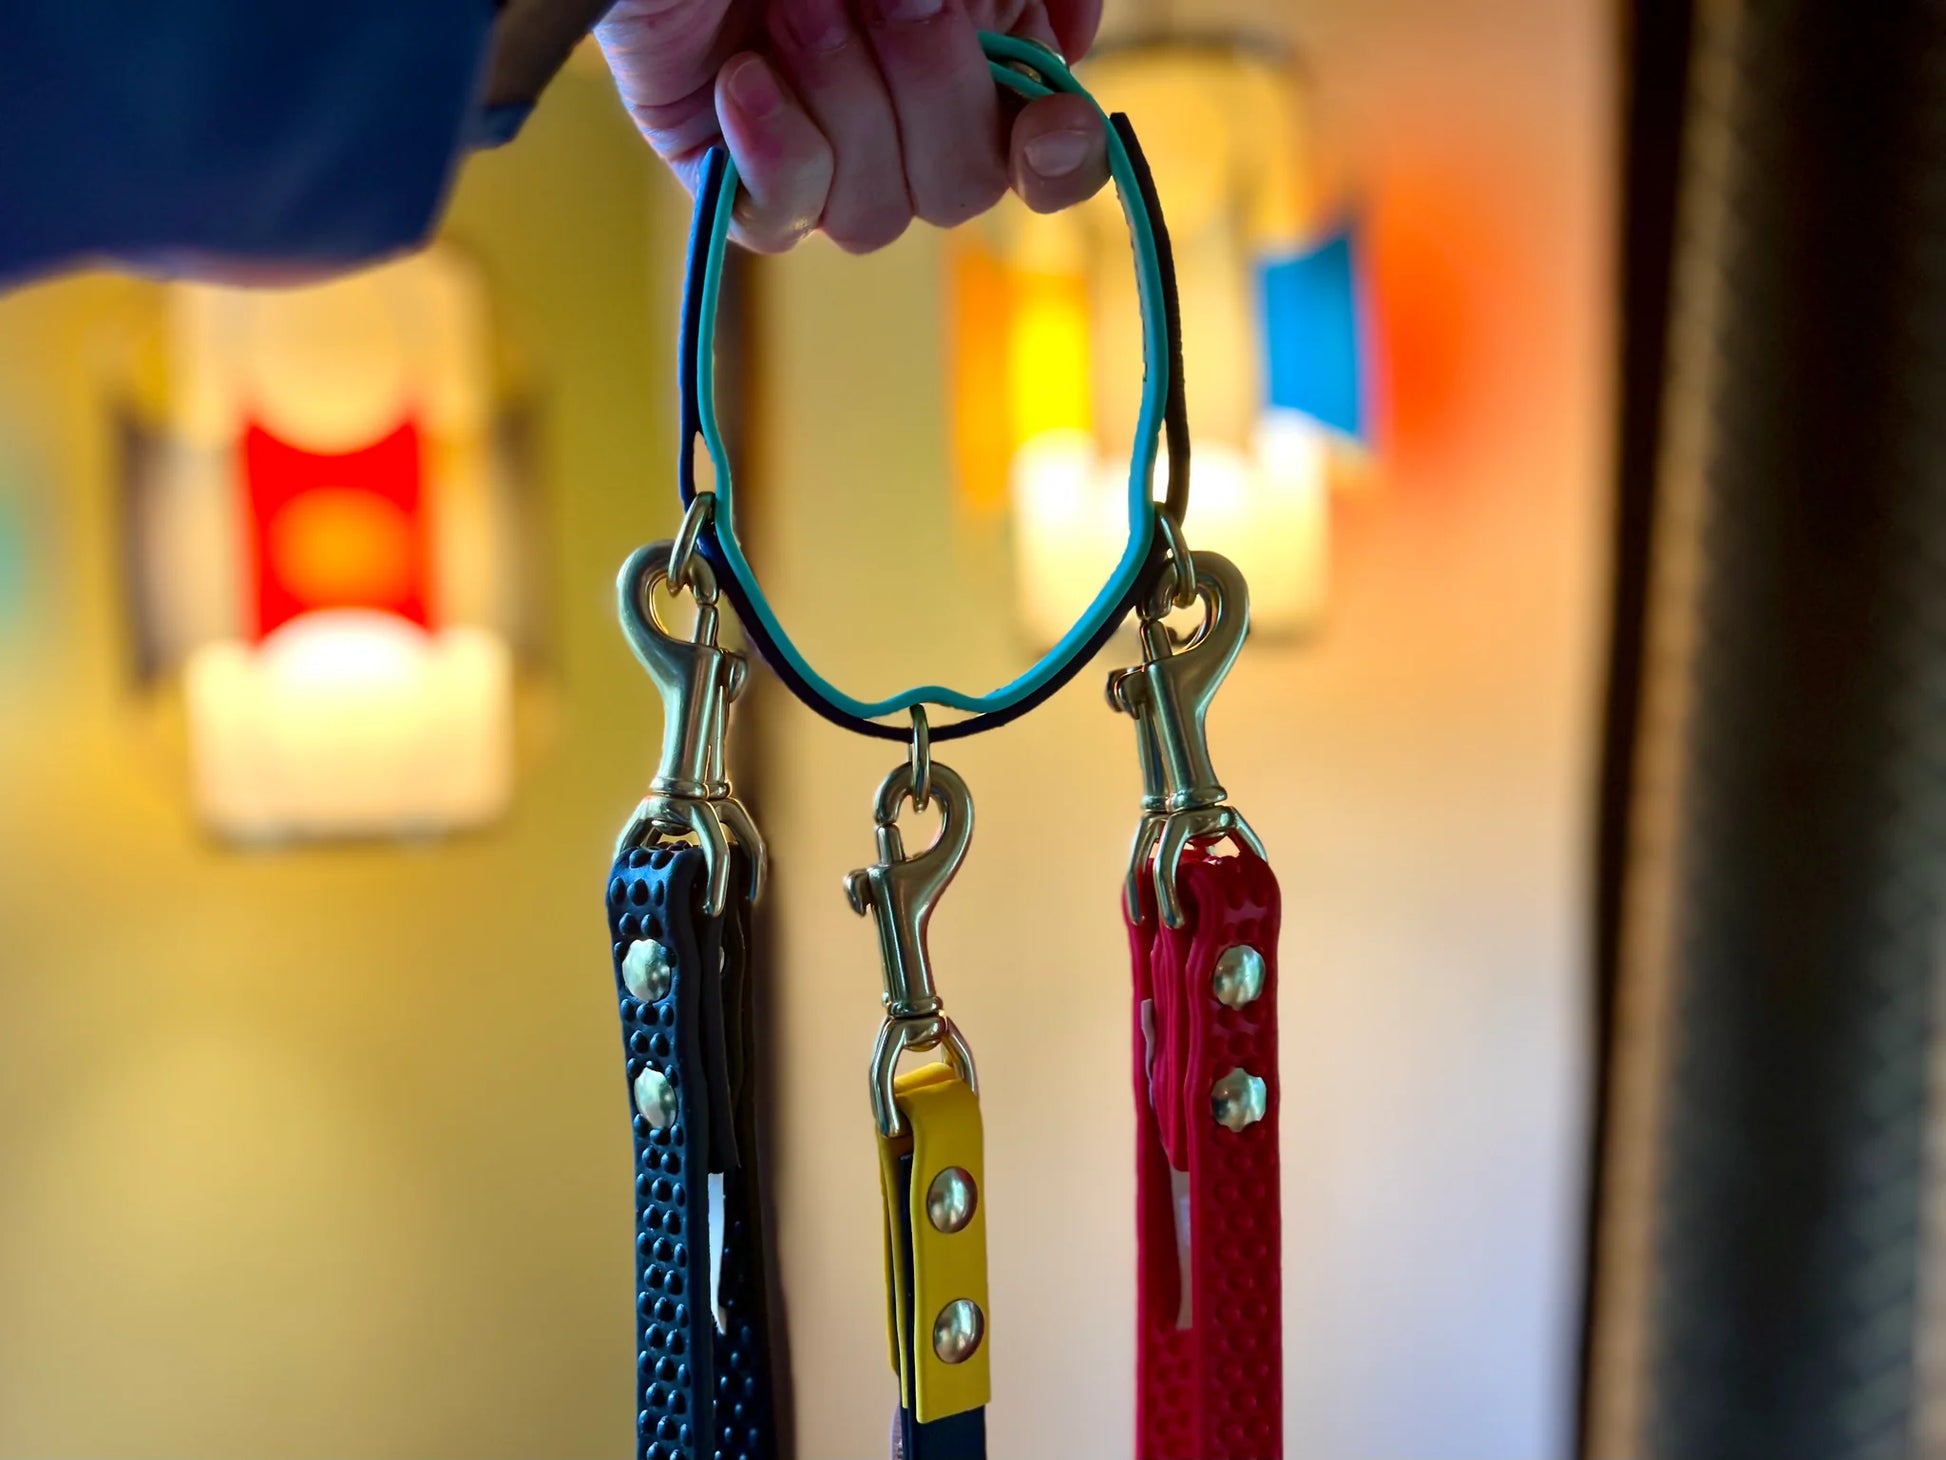 A neat freaks holding a Trailblazing Tails: The Leash Organiser with different colored leashes from Your Whole Dog.